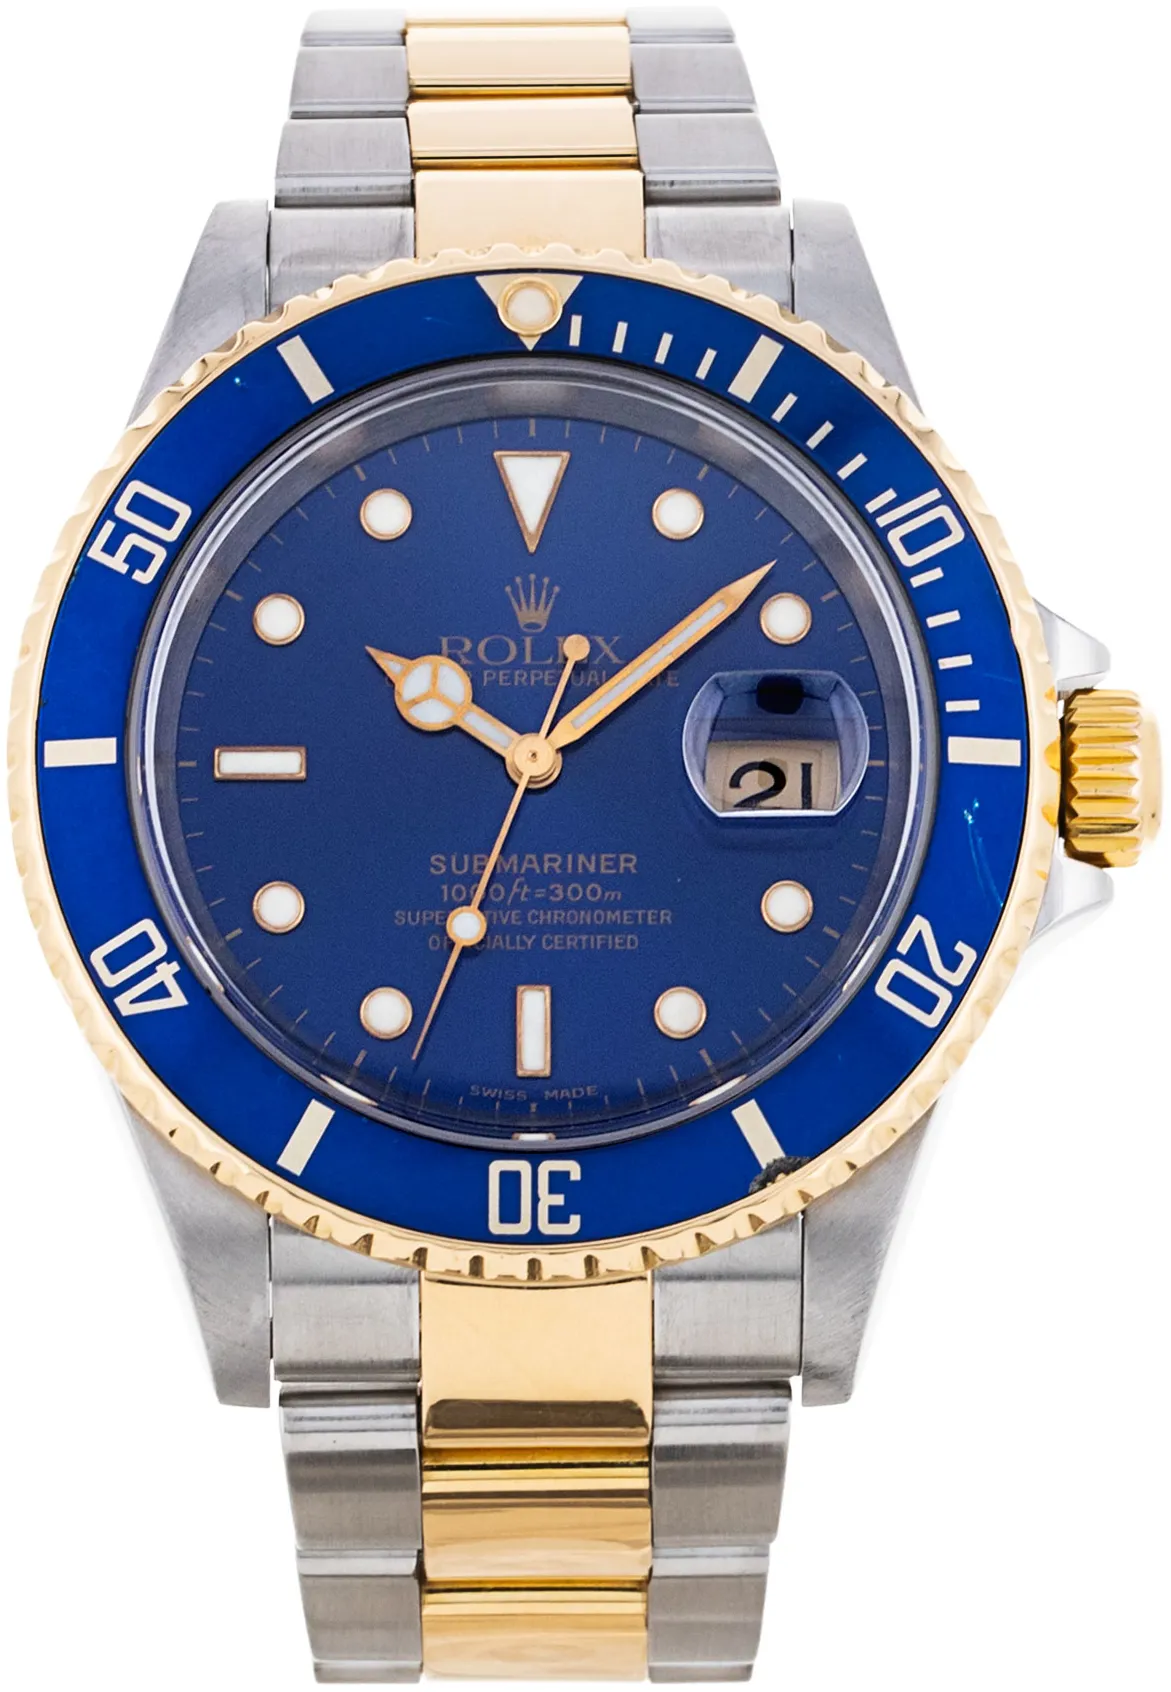 Rolex Submariner 16613 40mm Yellow gold and stainless steel Blue